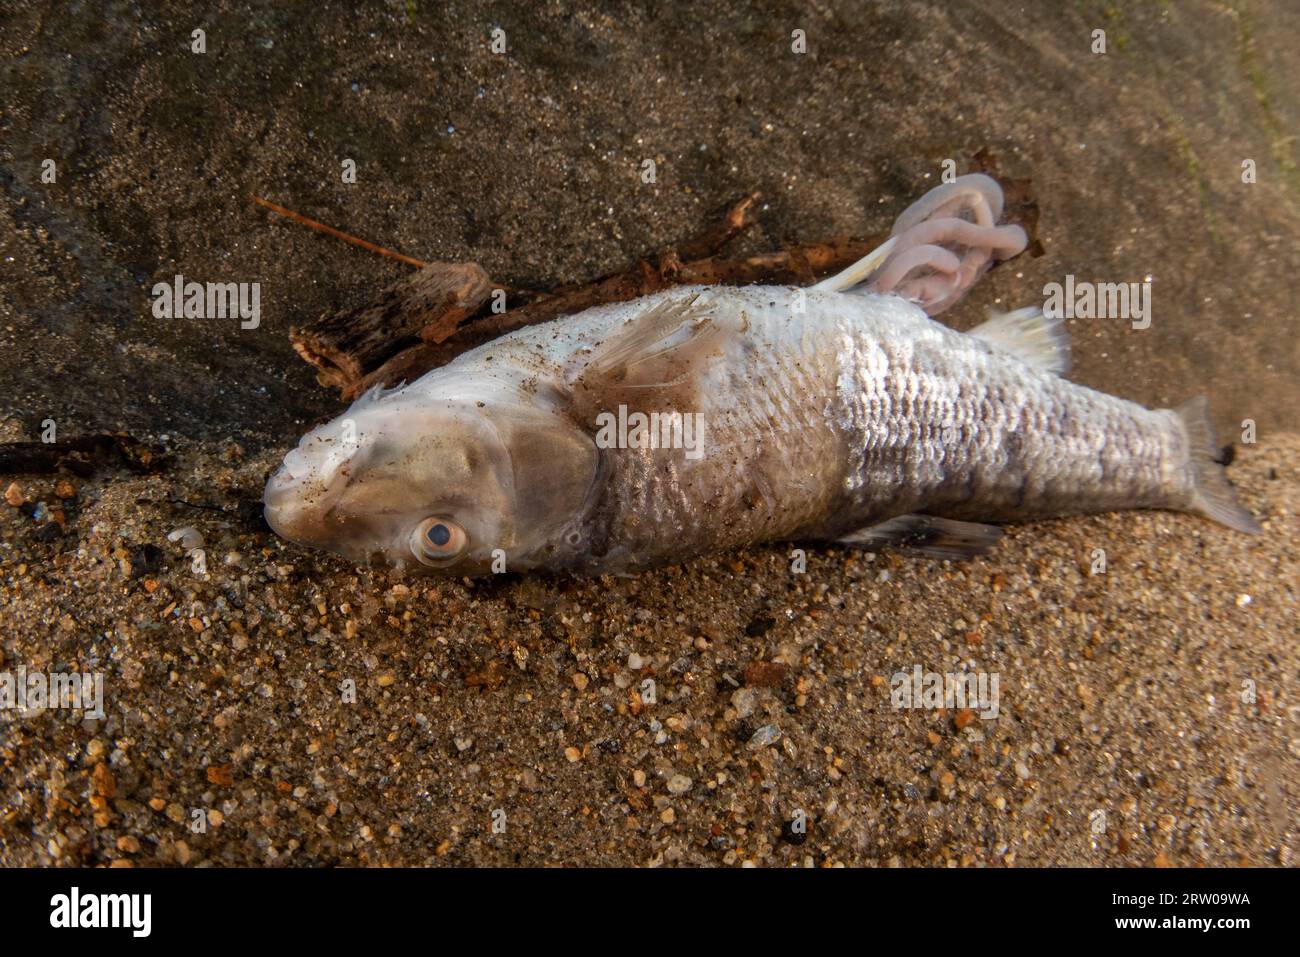 A dead central stoneroller fish (Campostoma anomalum) at the bottom of a river in Eastern North America. Stock Photo